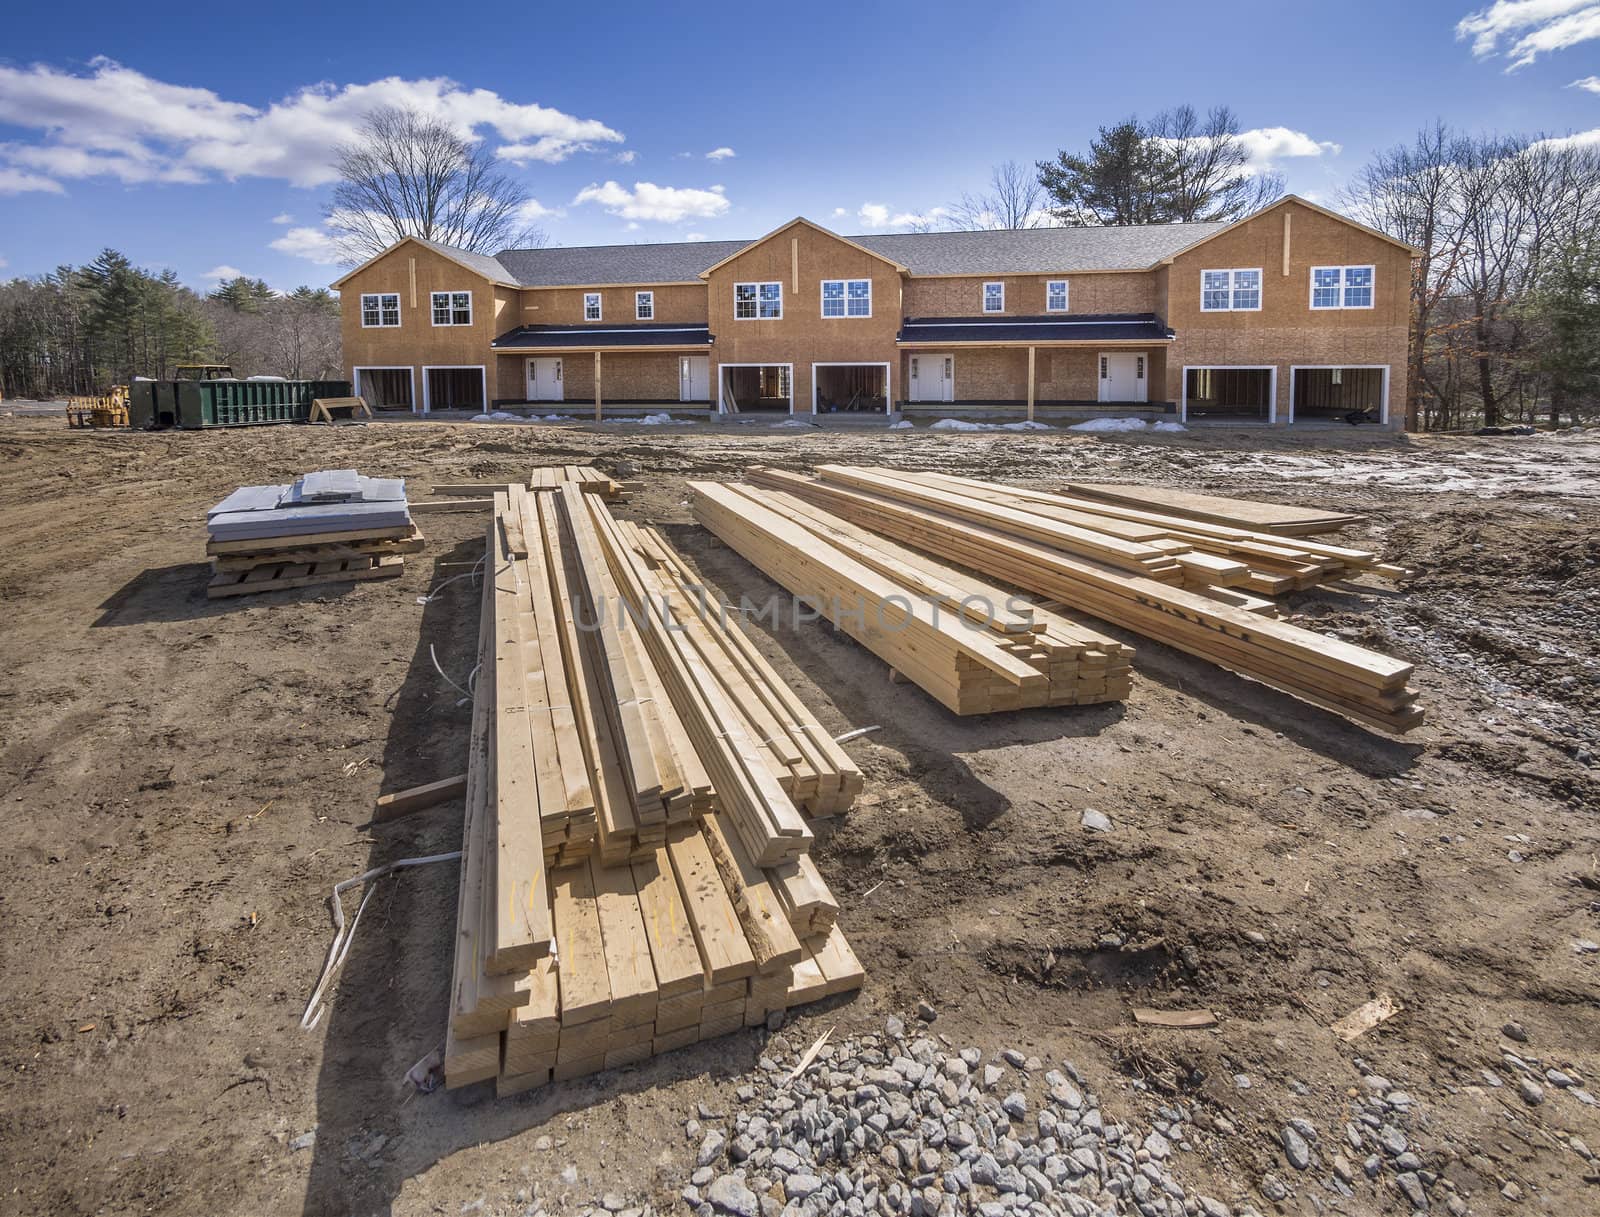 Multi family housing construction framing in the suburbs